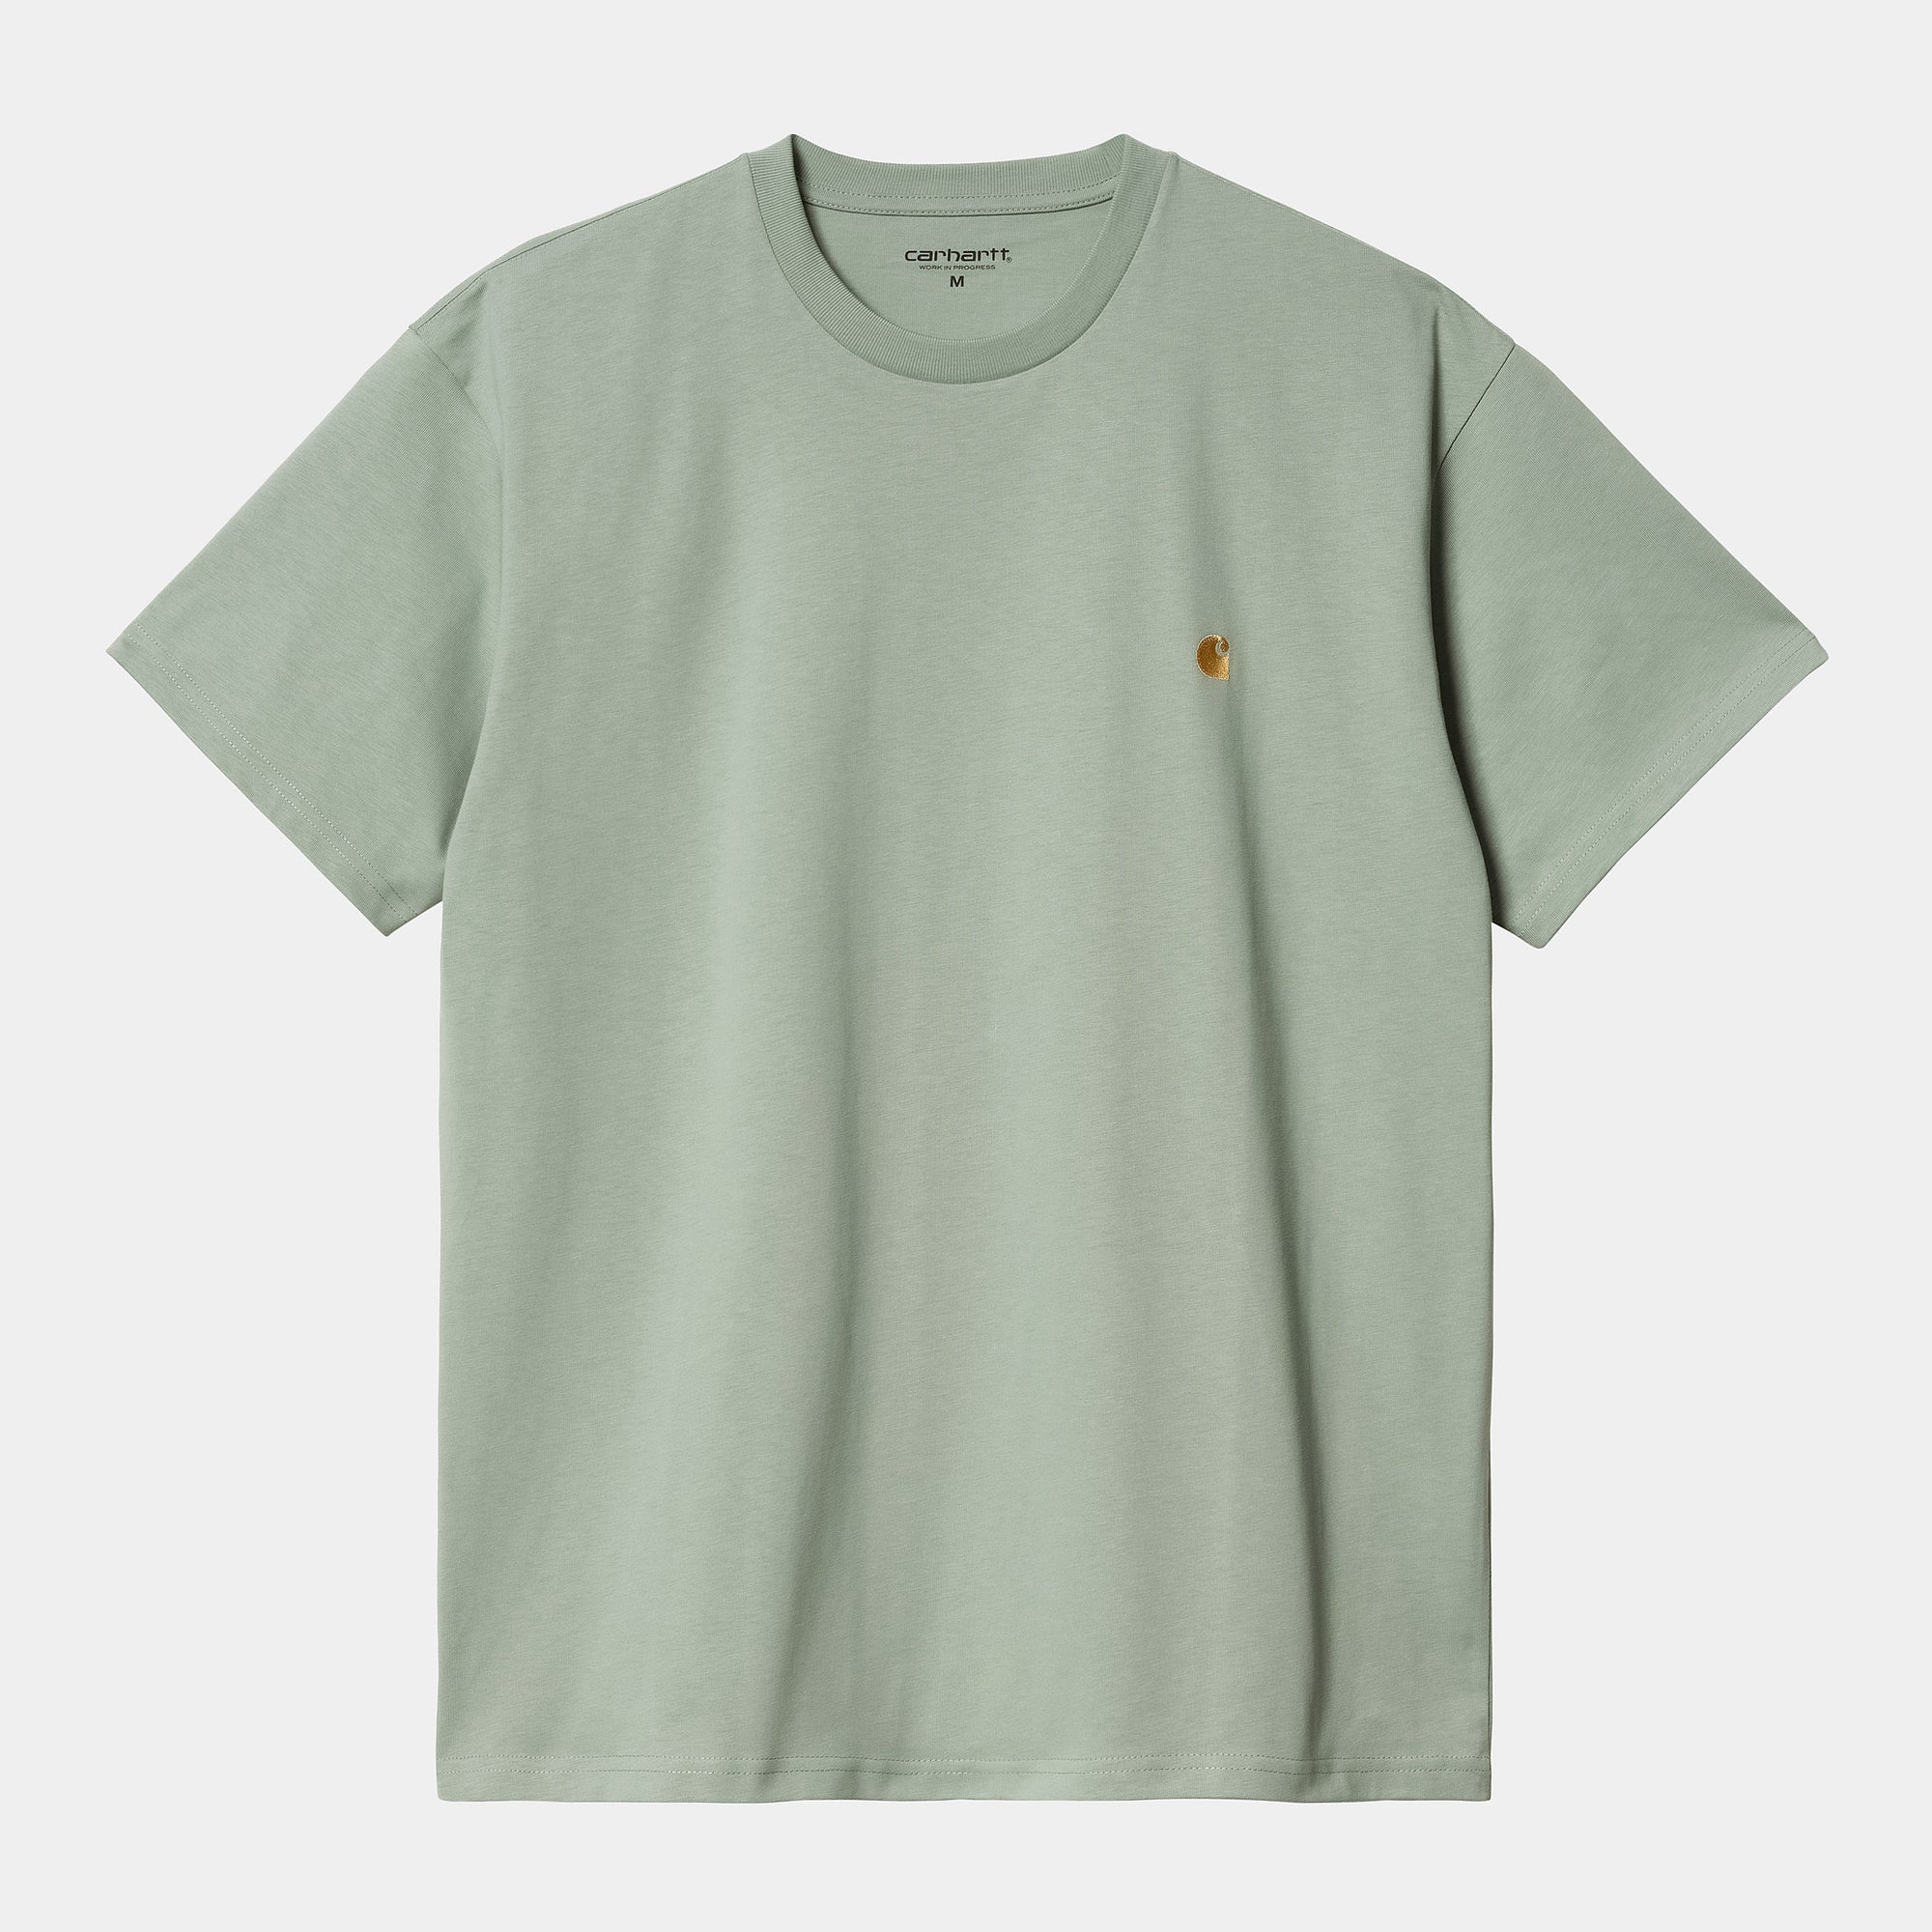 Carhartt WIP - Chase T-Shirt - Glassy Teal / Gold